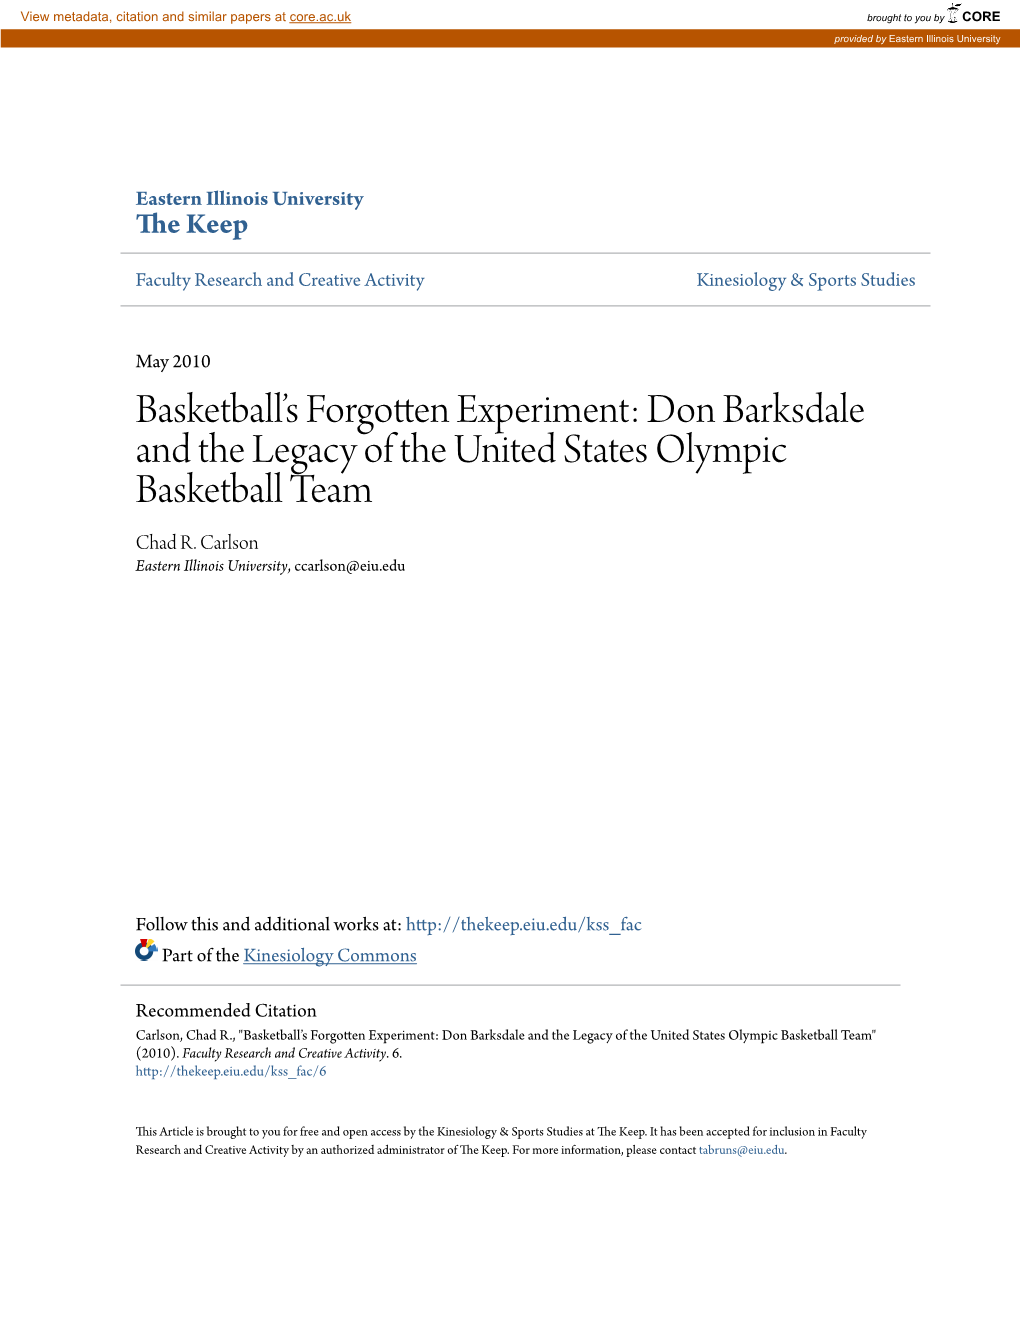 Don Barksdale and the Legacy of the United States Olympic Basketball Team Chad R